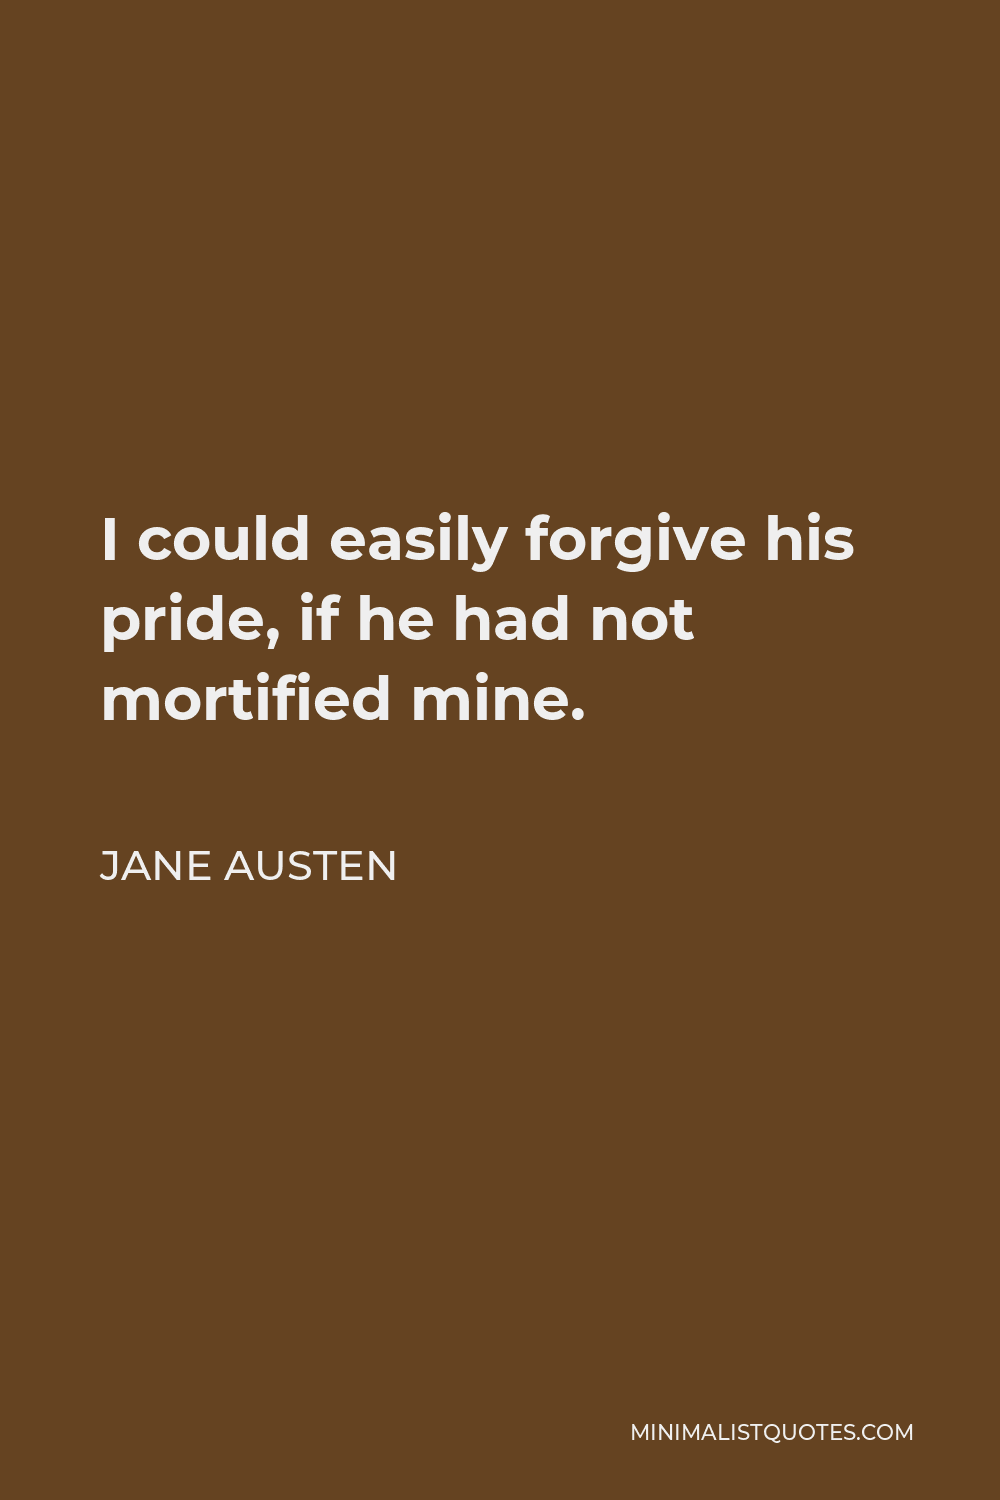 Jane Austen Quote - I could easily forgive his pride, if he had not mortified mine.